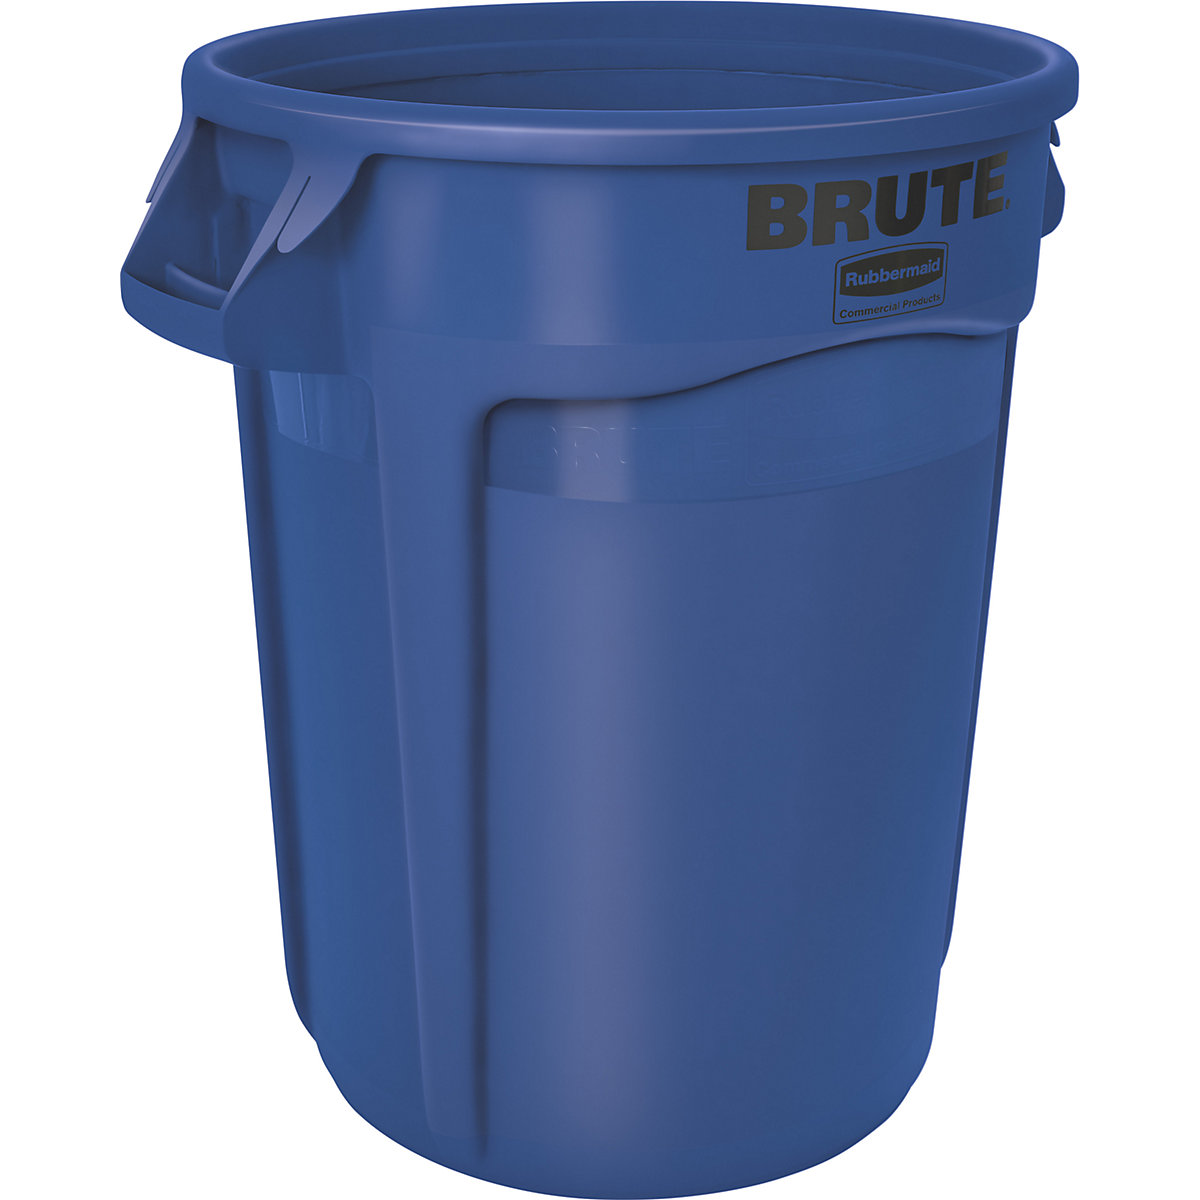 Rubbermaid – BRUTE® universal container/multi purpose container, round, capacity approx. 75 l, blue